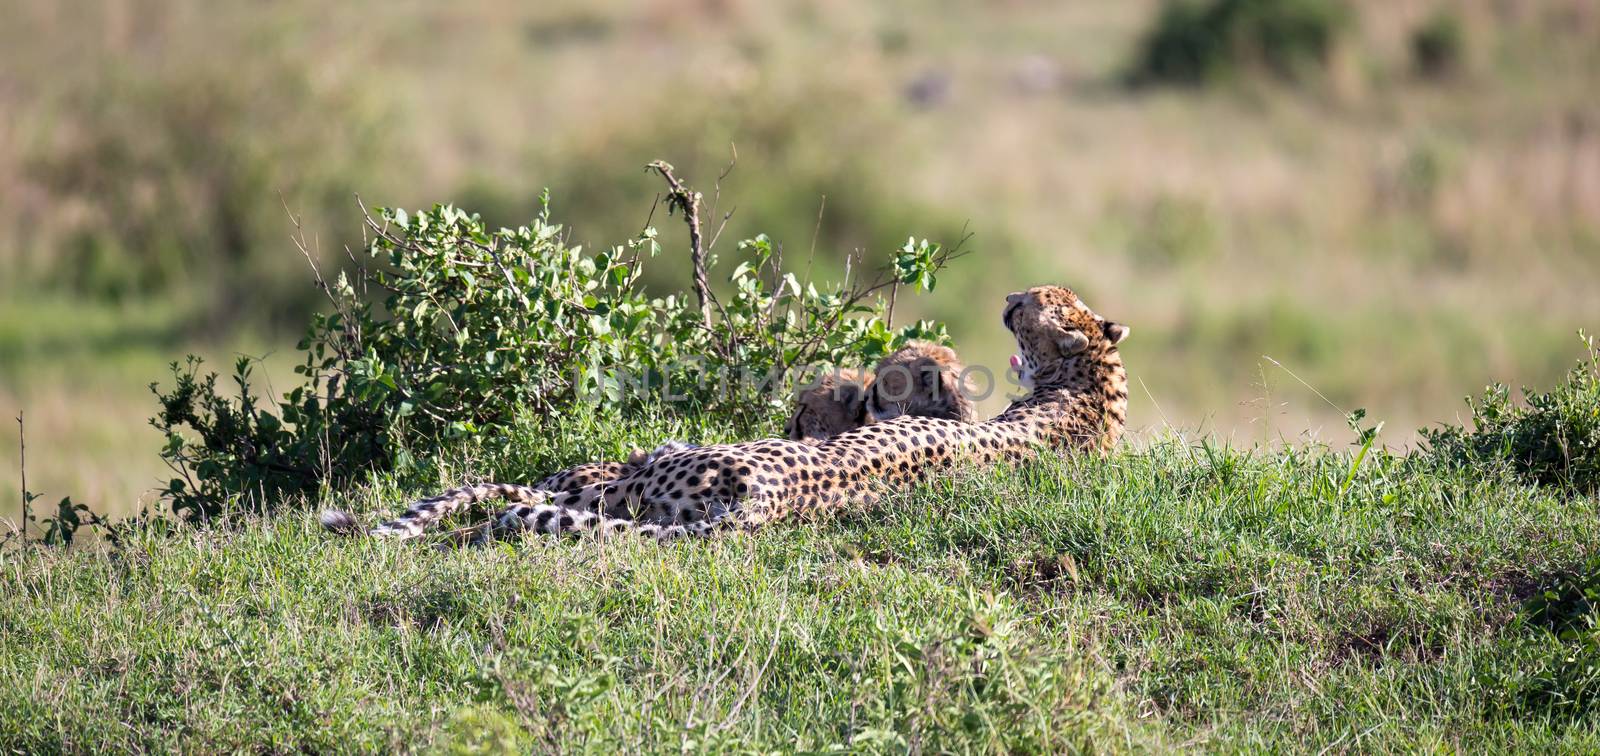 A cheetah mother with two children in the Kenyan savannah by 25ehaag6